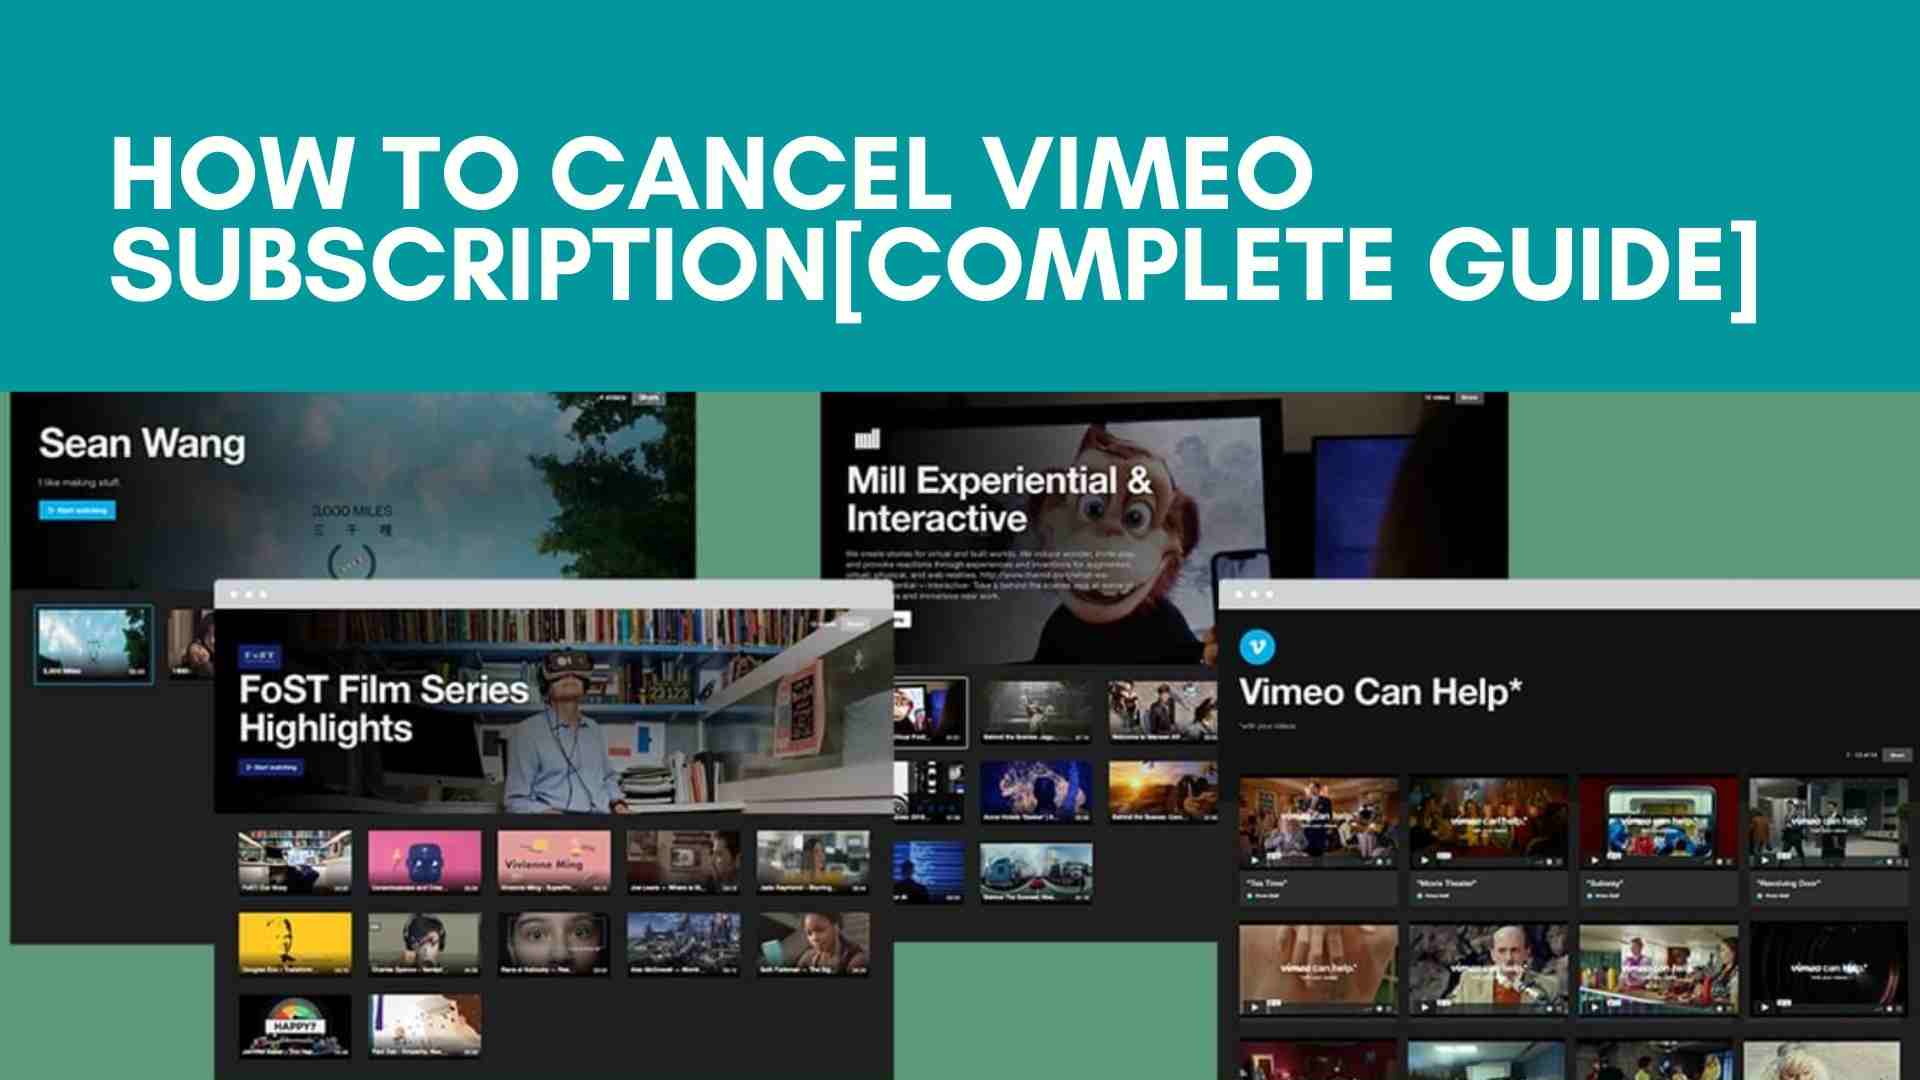 How to Cancel Vimeo Subscription